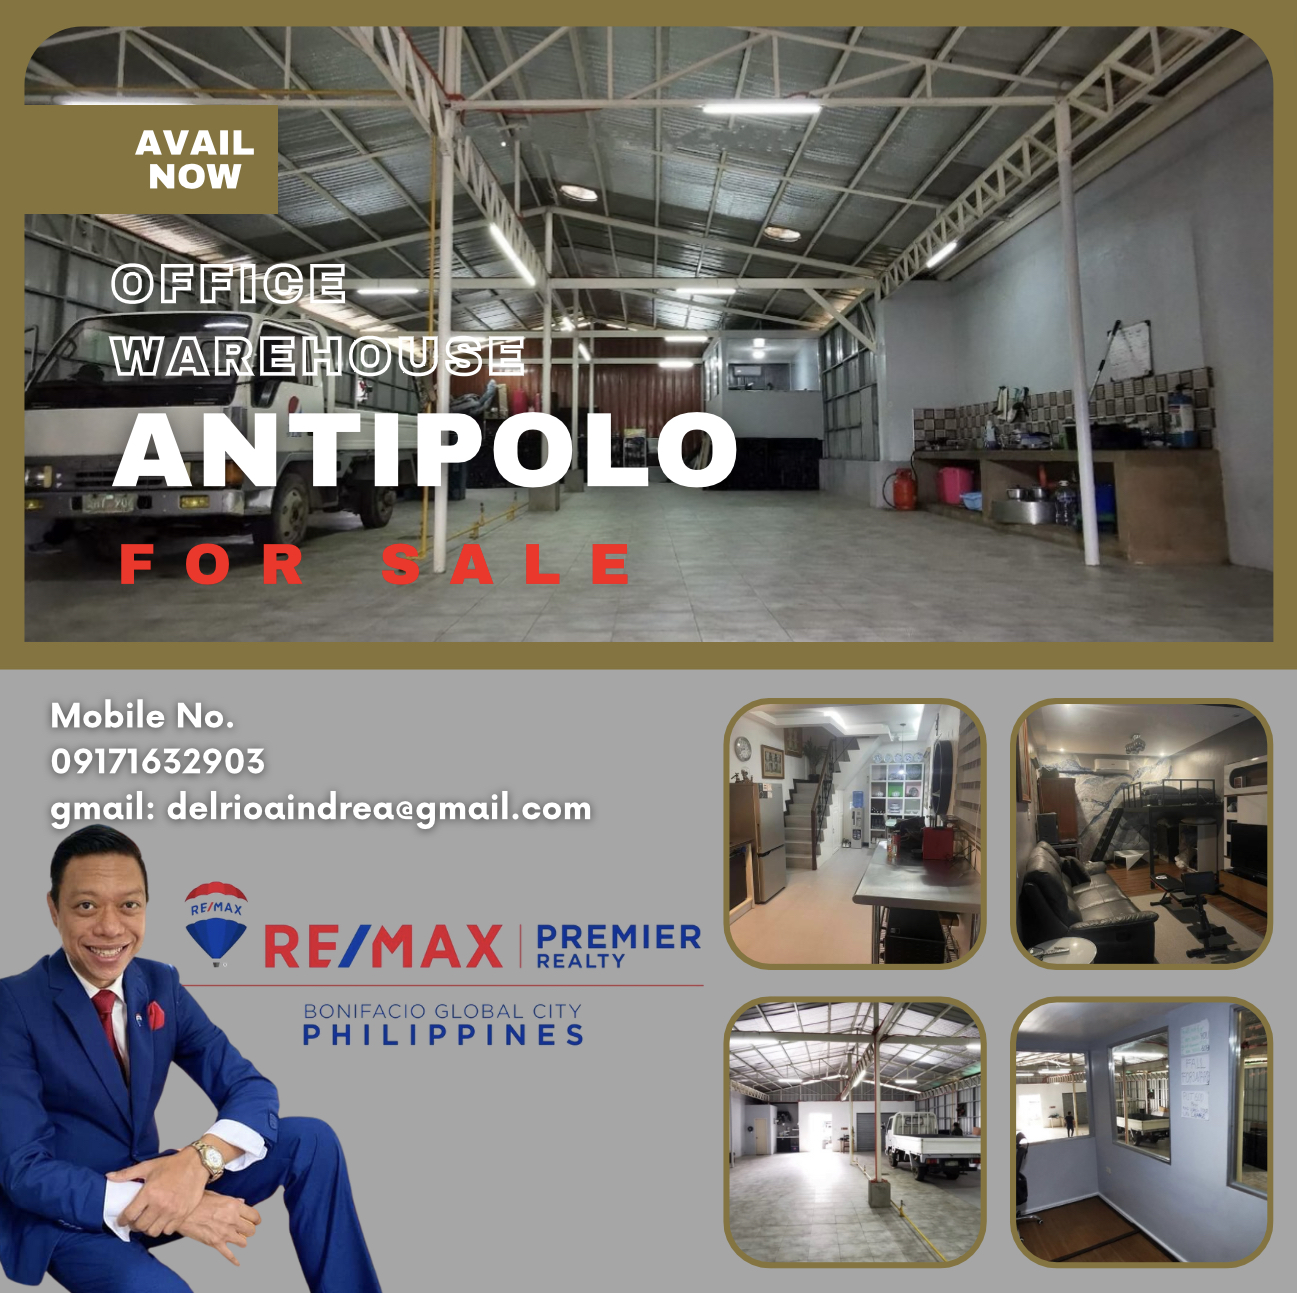 Antipolo City, Rizal – Office Warehouse for Sale‼️